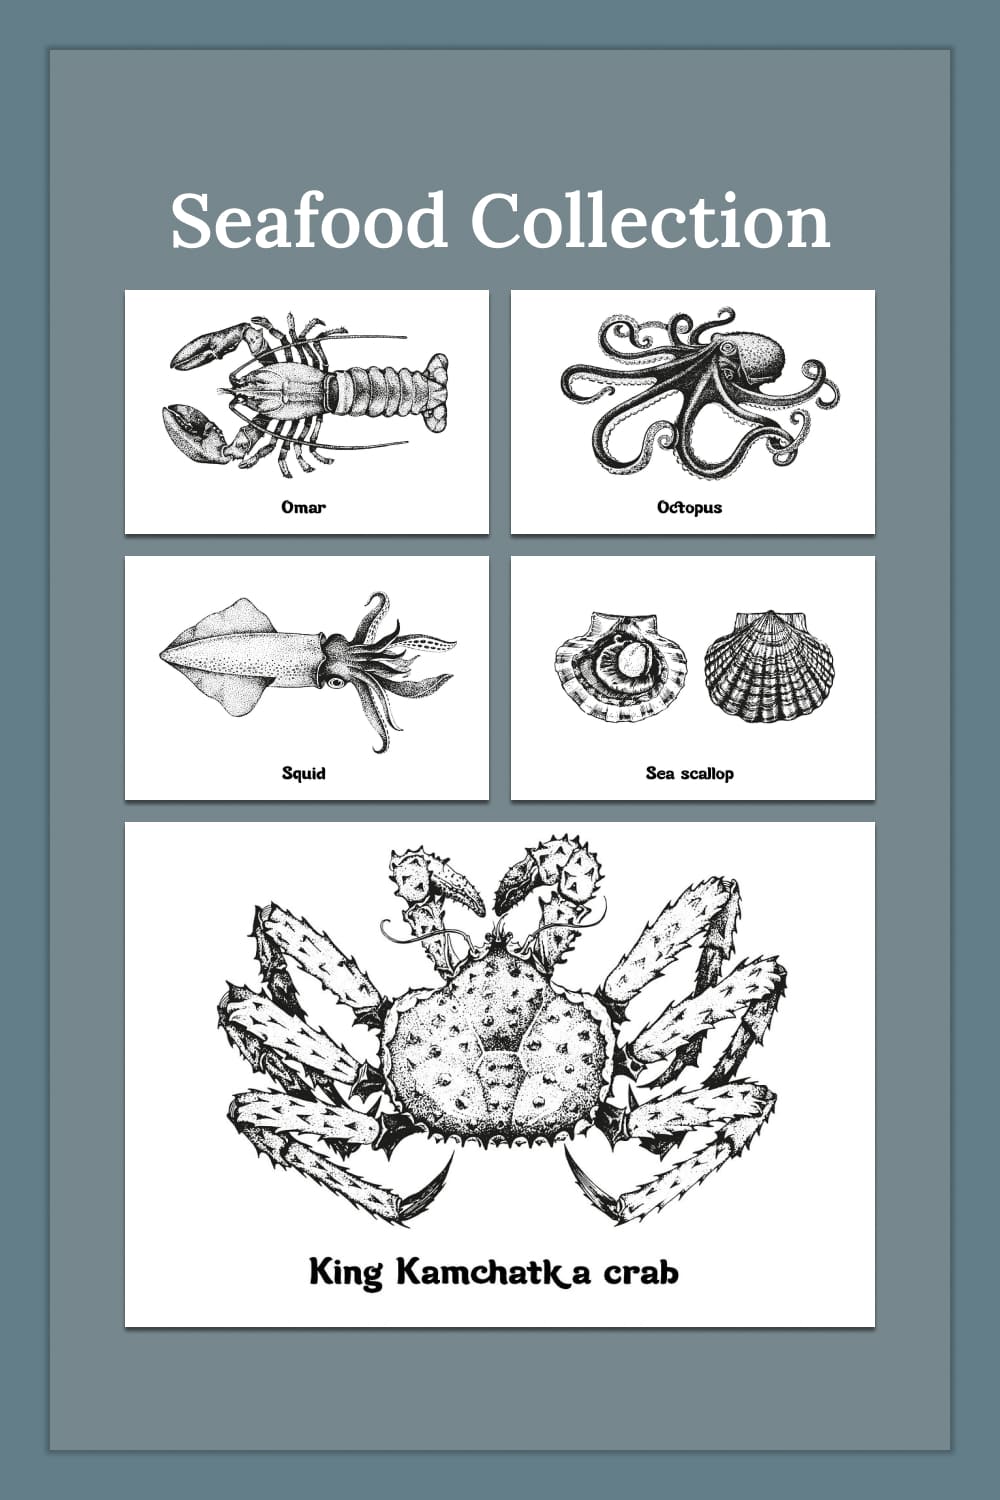 Seafood collection - pinterest image preview.